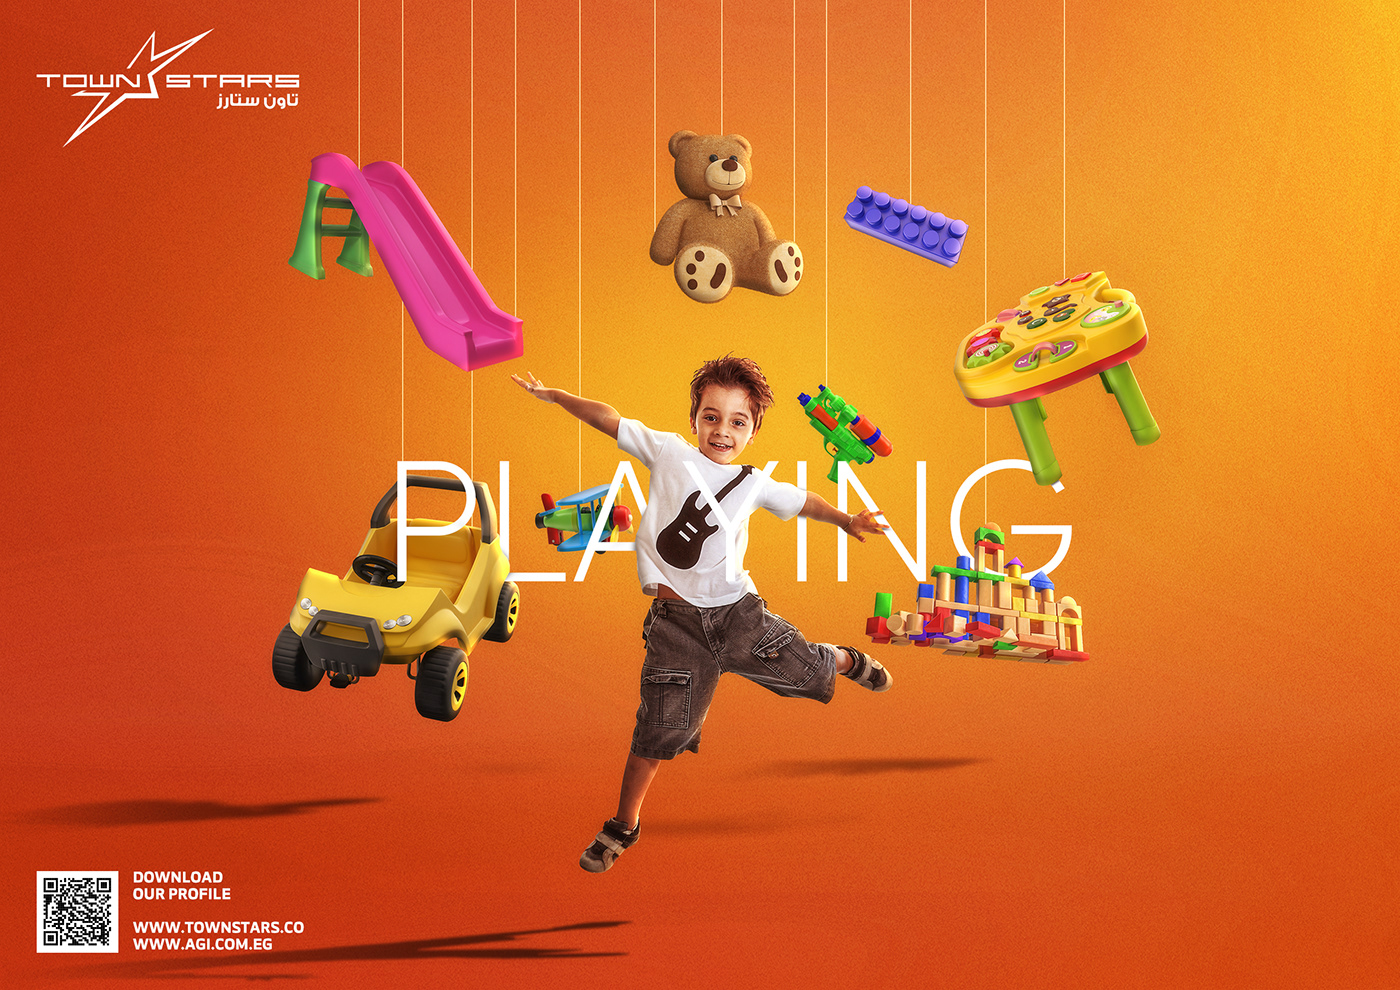 Advertising  campaign gym mall restaurant Shopping business Entertainment Kids area Outing